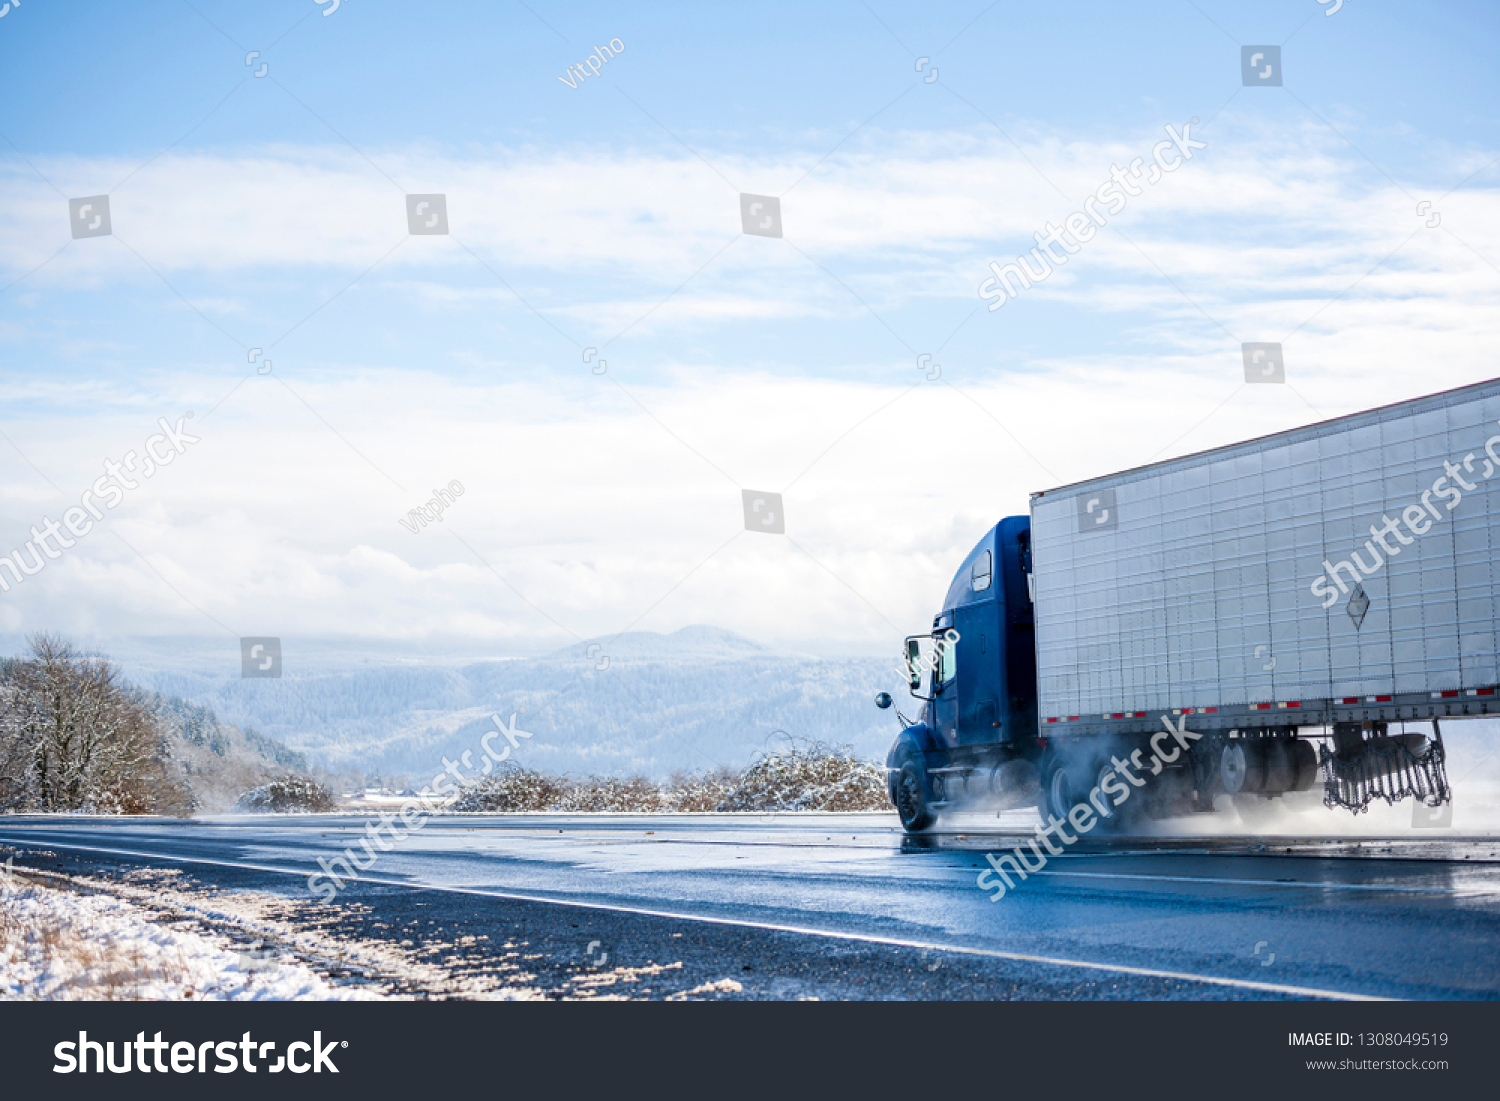 Big rig pro long haul blue semi truck tractor transporting commercial cargo in refrigerator semi trailer going on the wet glossy road with water from melting snow and winter snowy trees on the side #1308049519